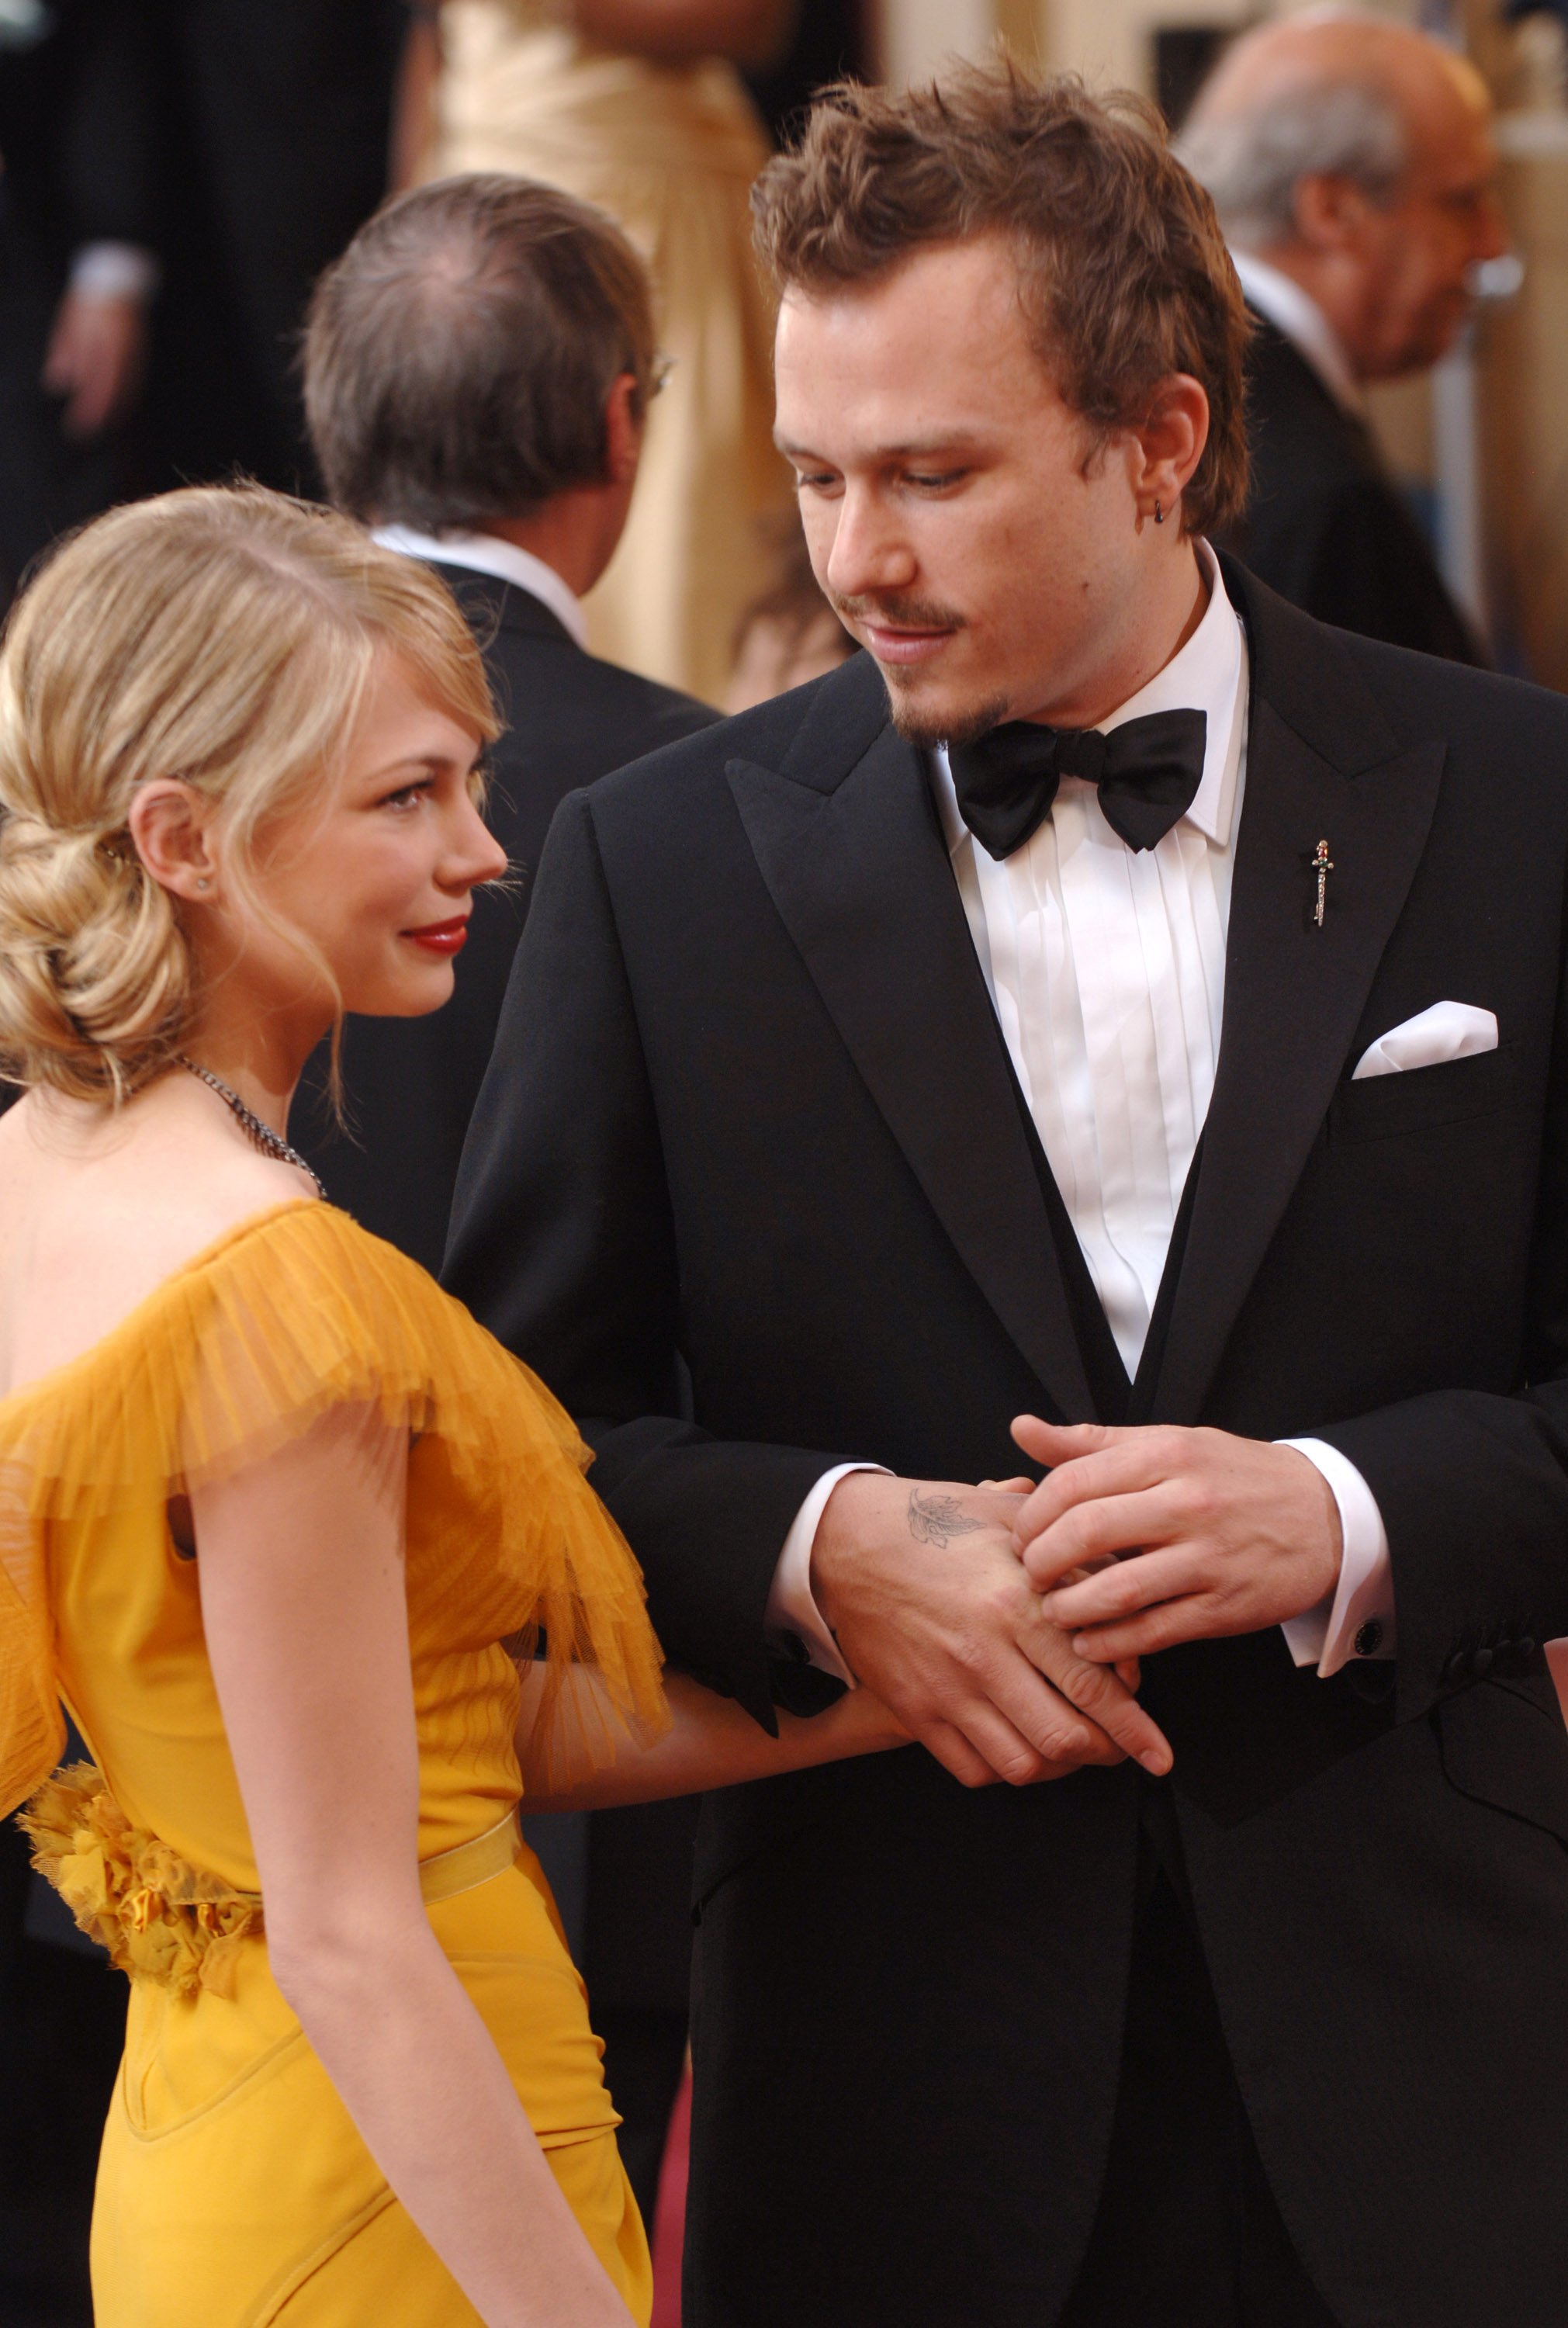 Actress Michelle Williams and actor Heath Ledger attend the 78th Annual Academy Awards on March 5, 2006 ┃Source: Getty Images